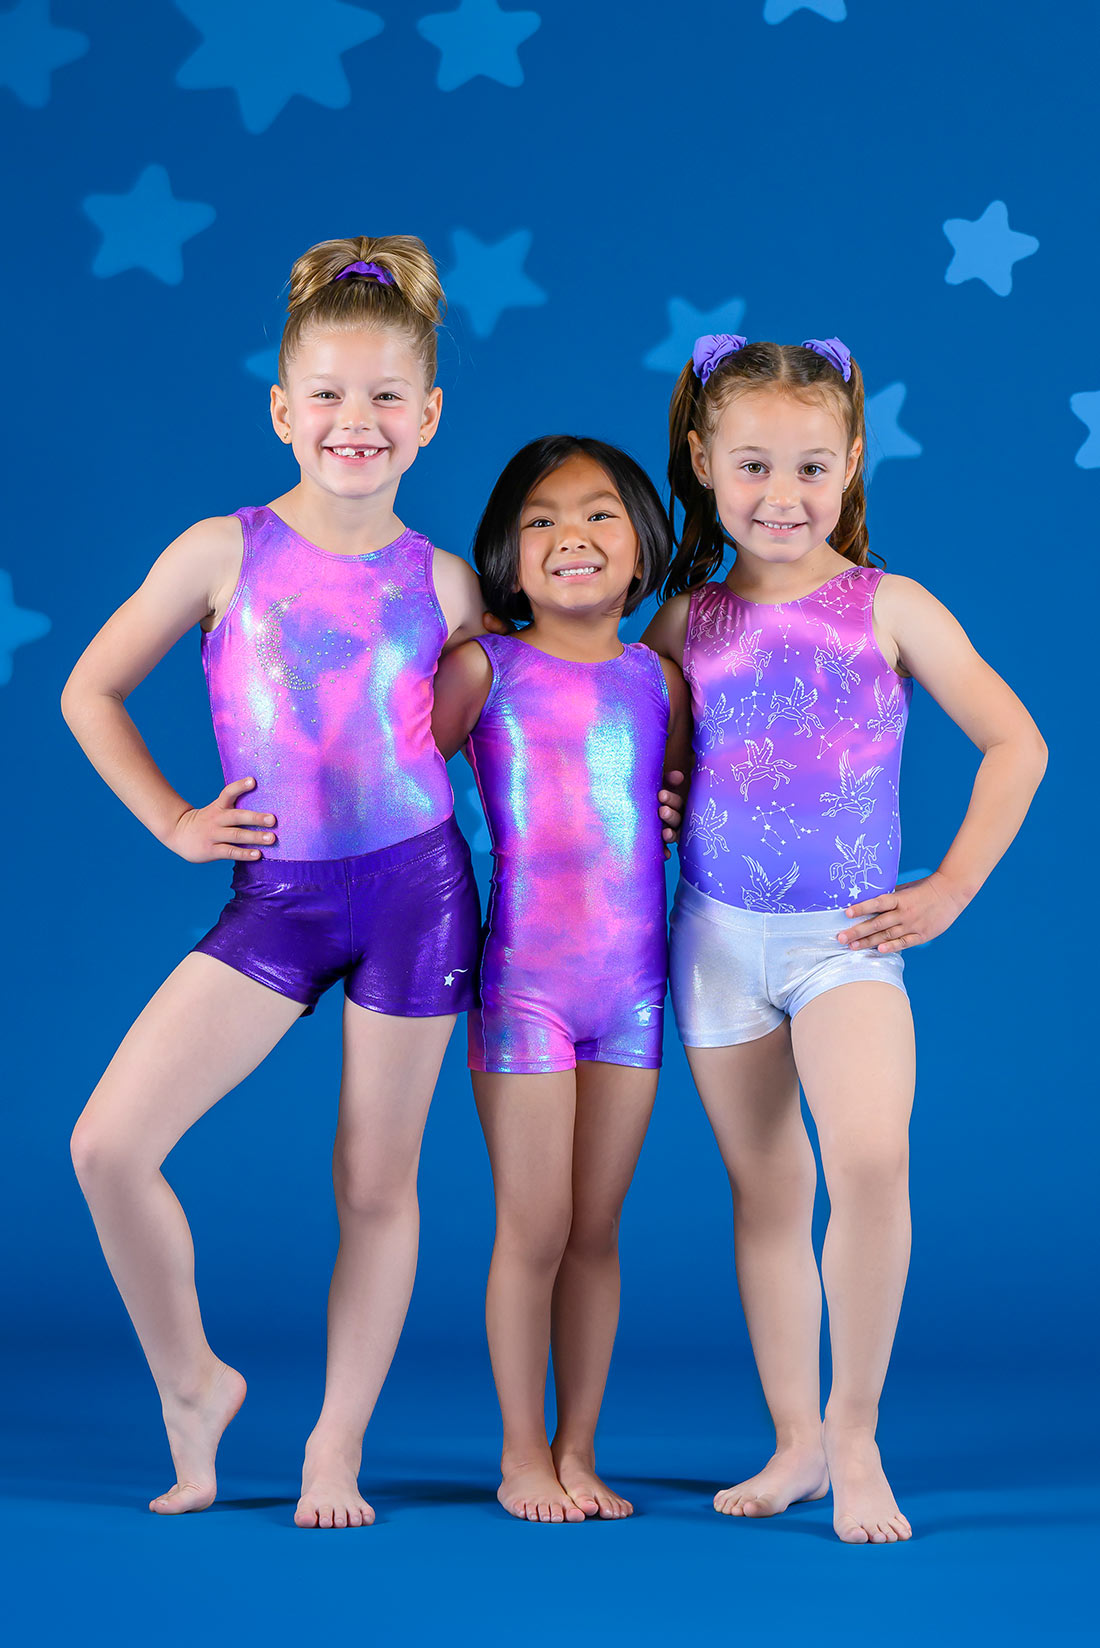 Three young girls wearing purple, pink, and silver gymnastics practice outfits by Destira, 2023